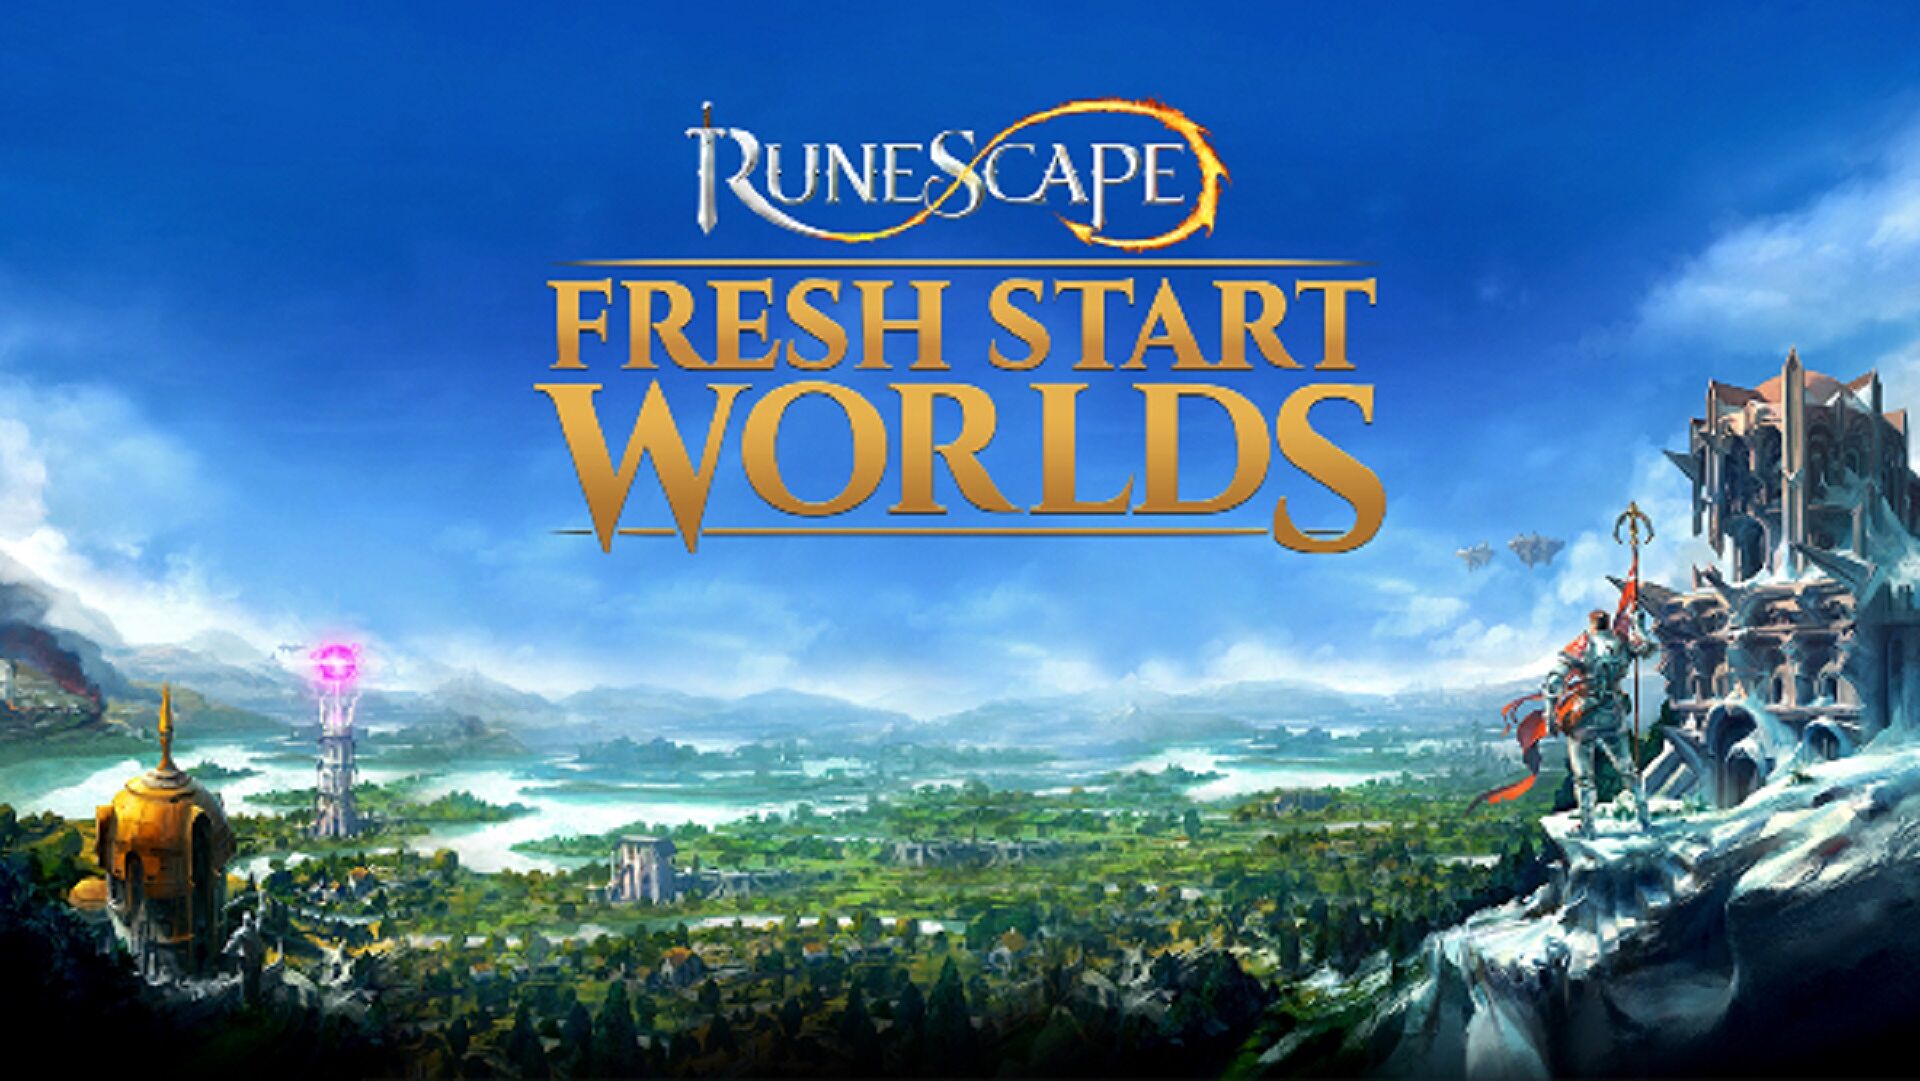 RuneScape now has Fresh Start Worlds — which brings its own perks and cons